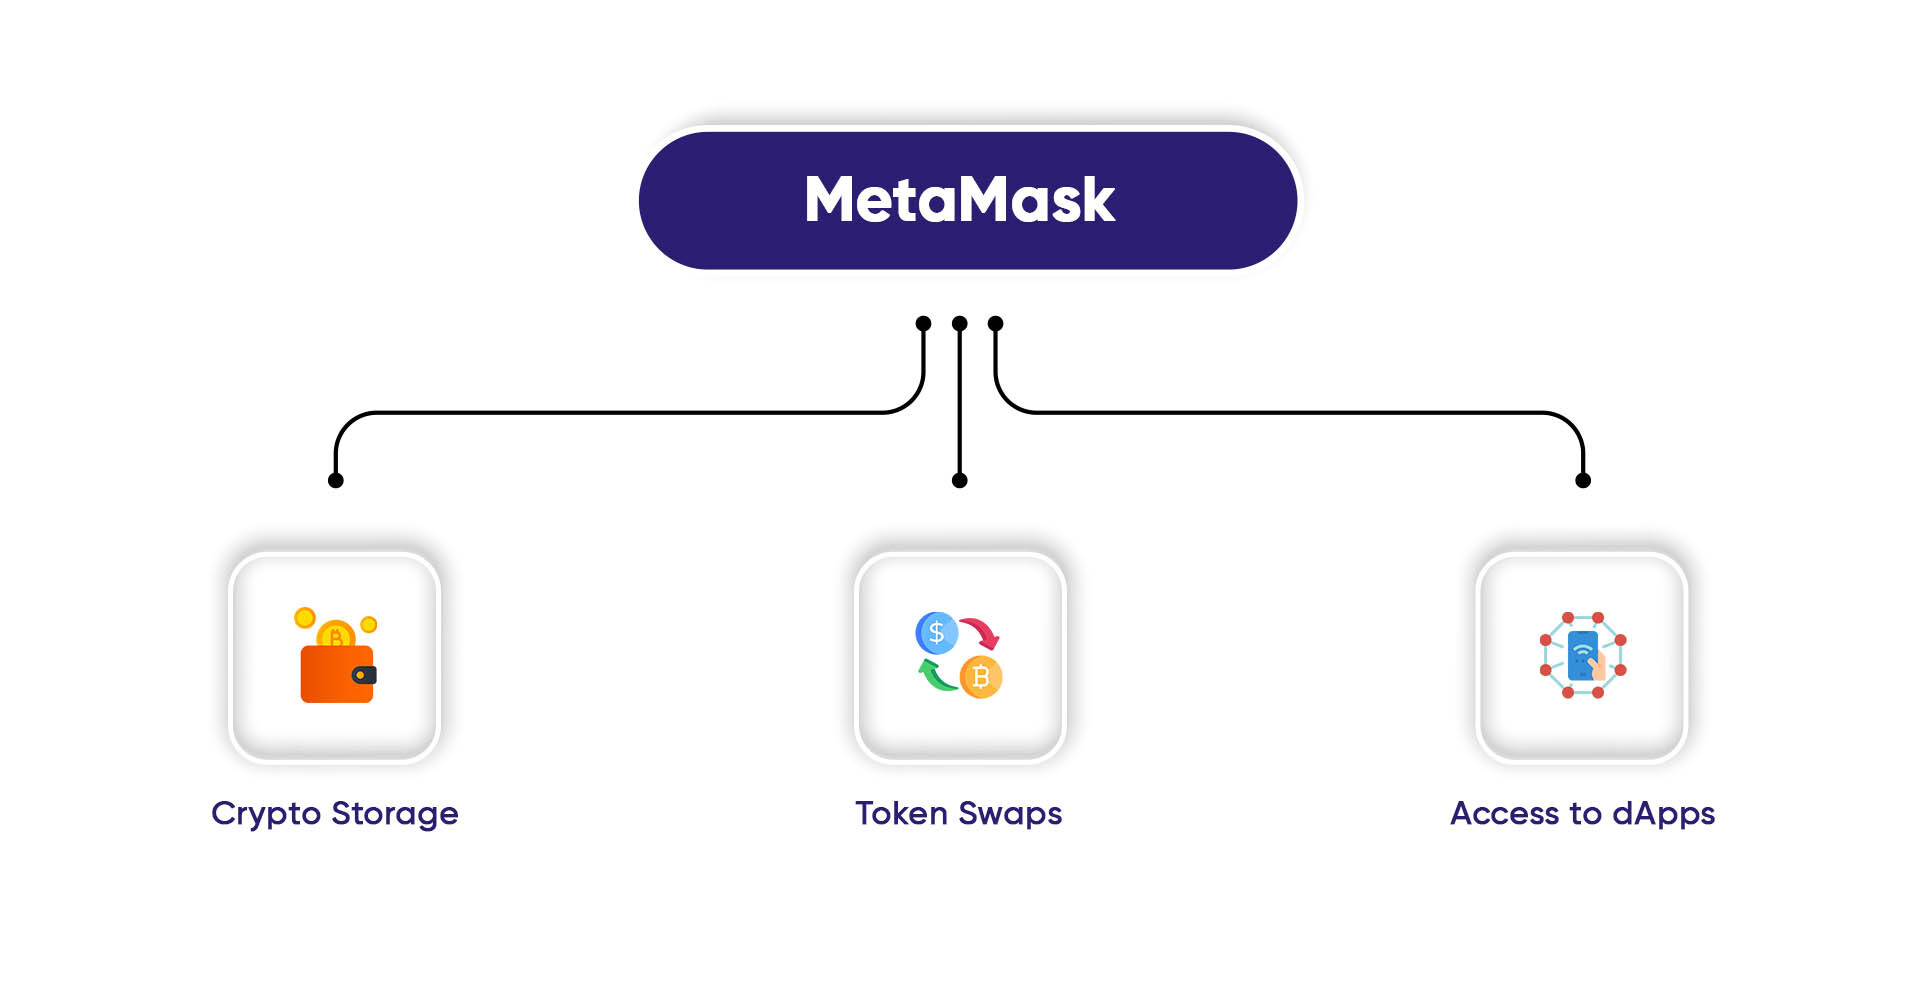 What is MetaMask used for